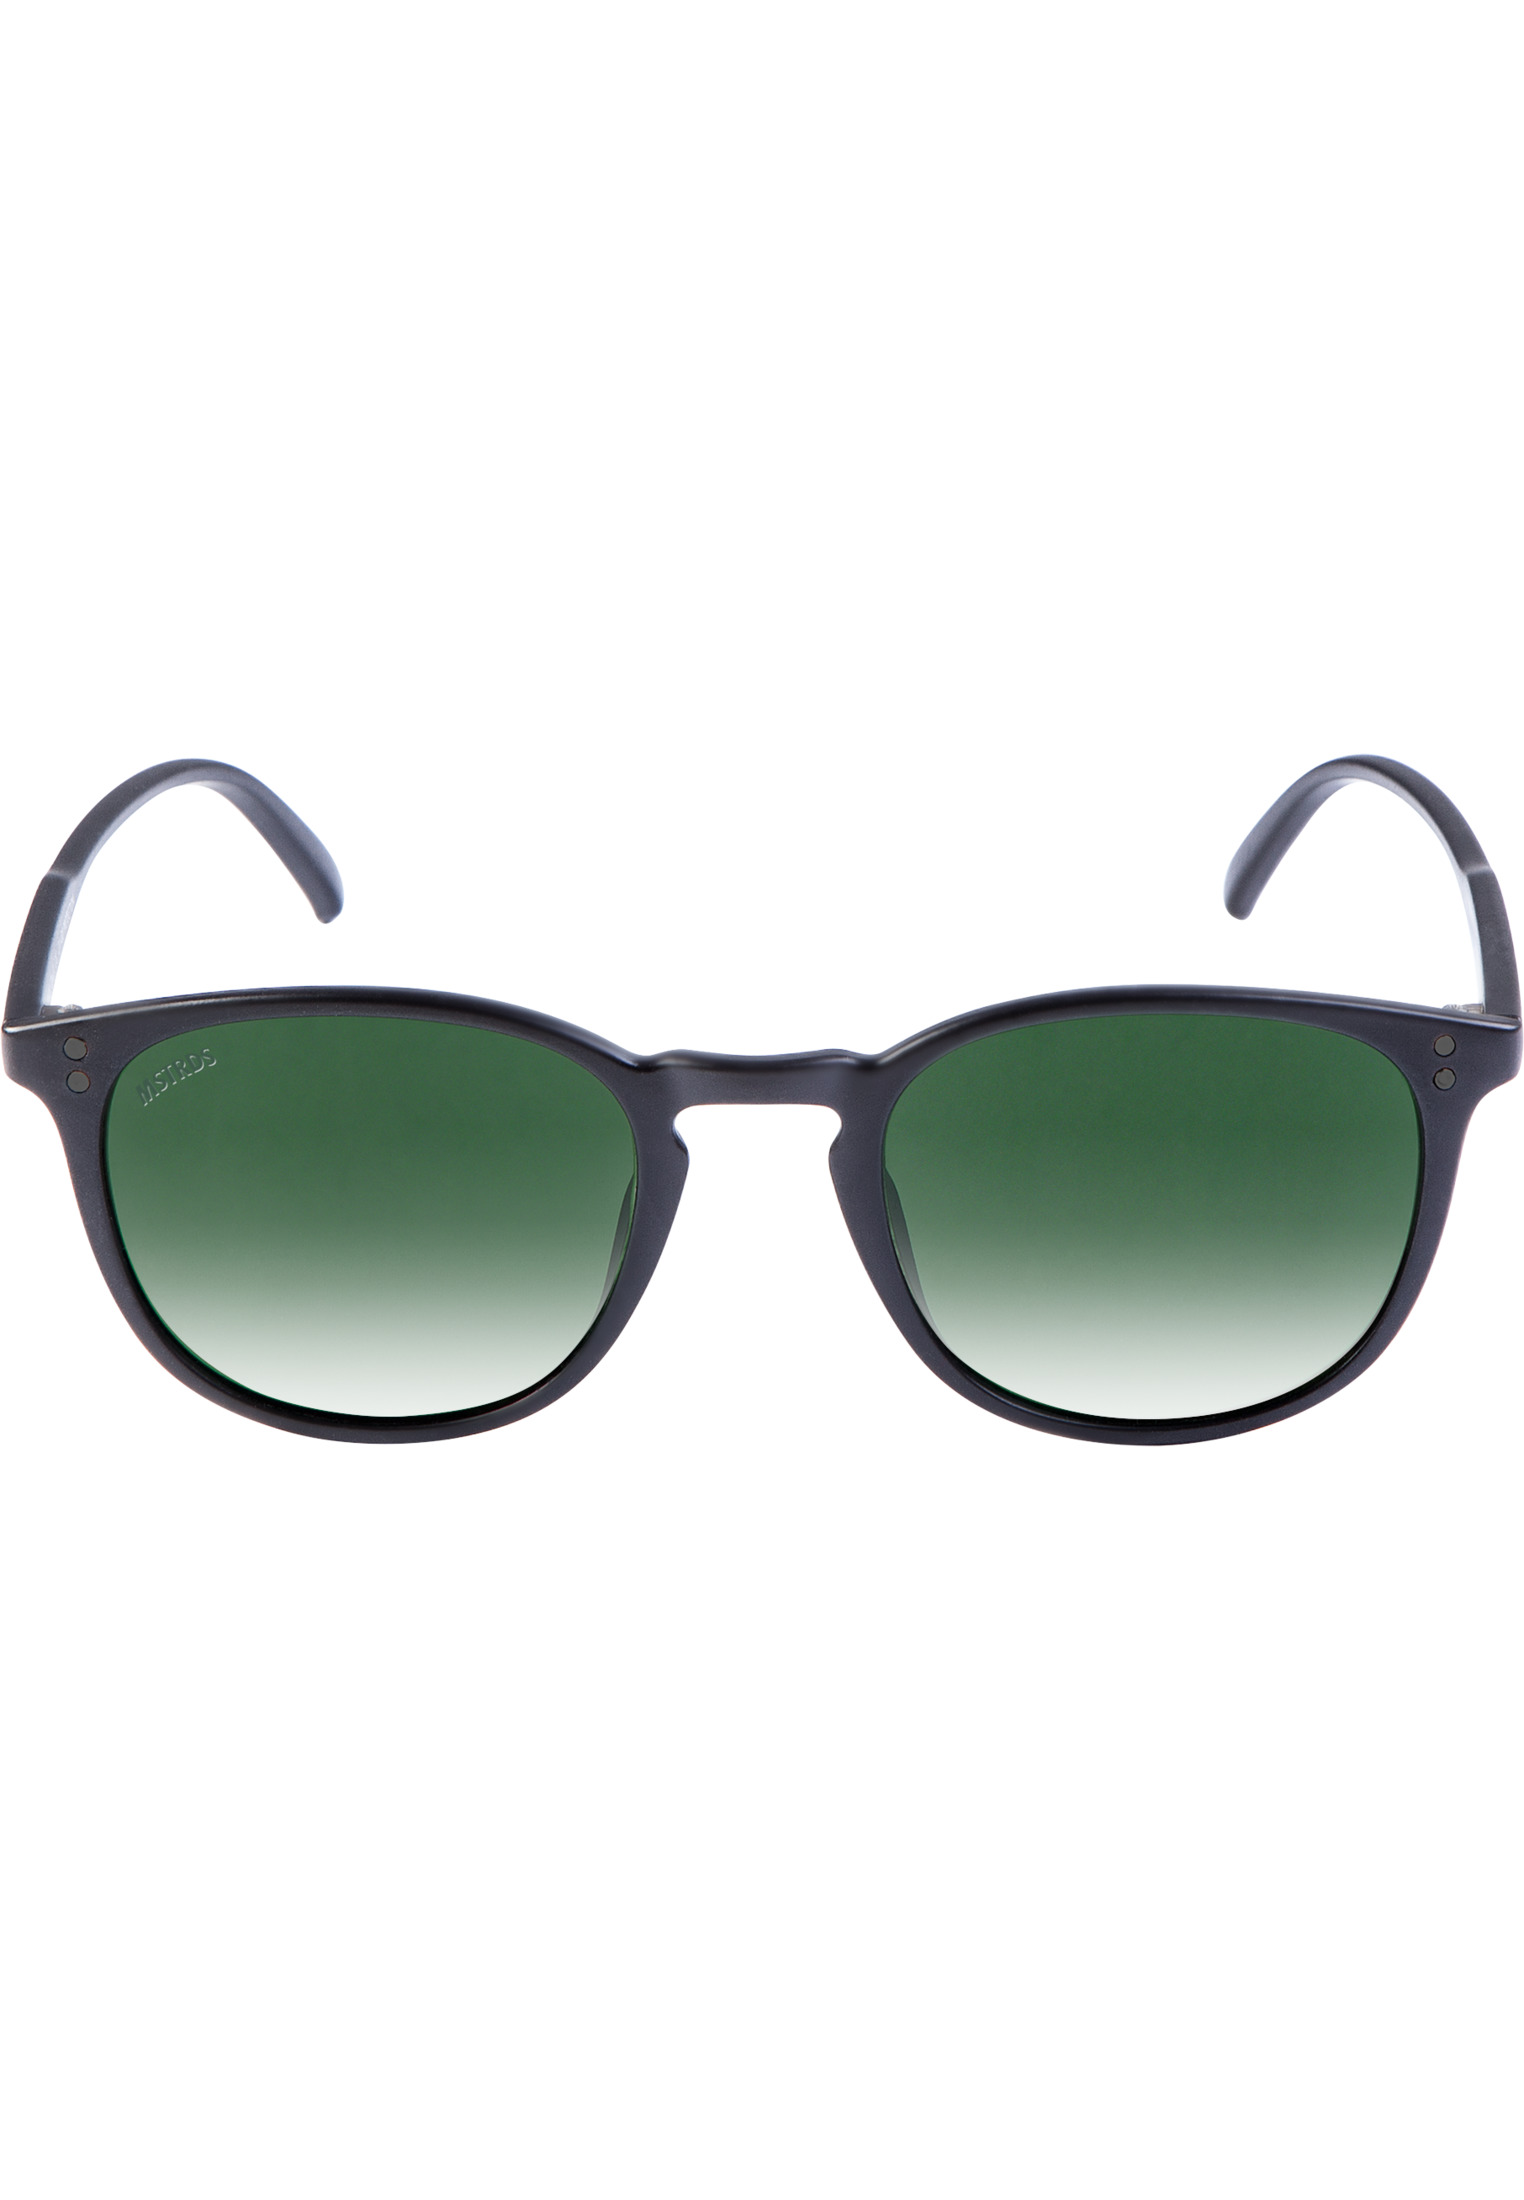 MSTRDS Sunglasses Arthur Youth